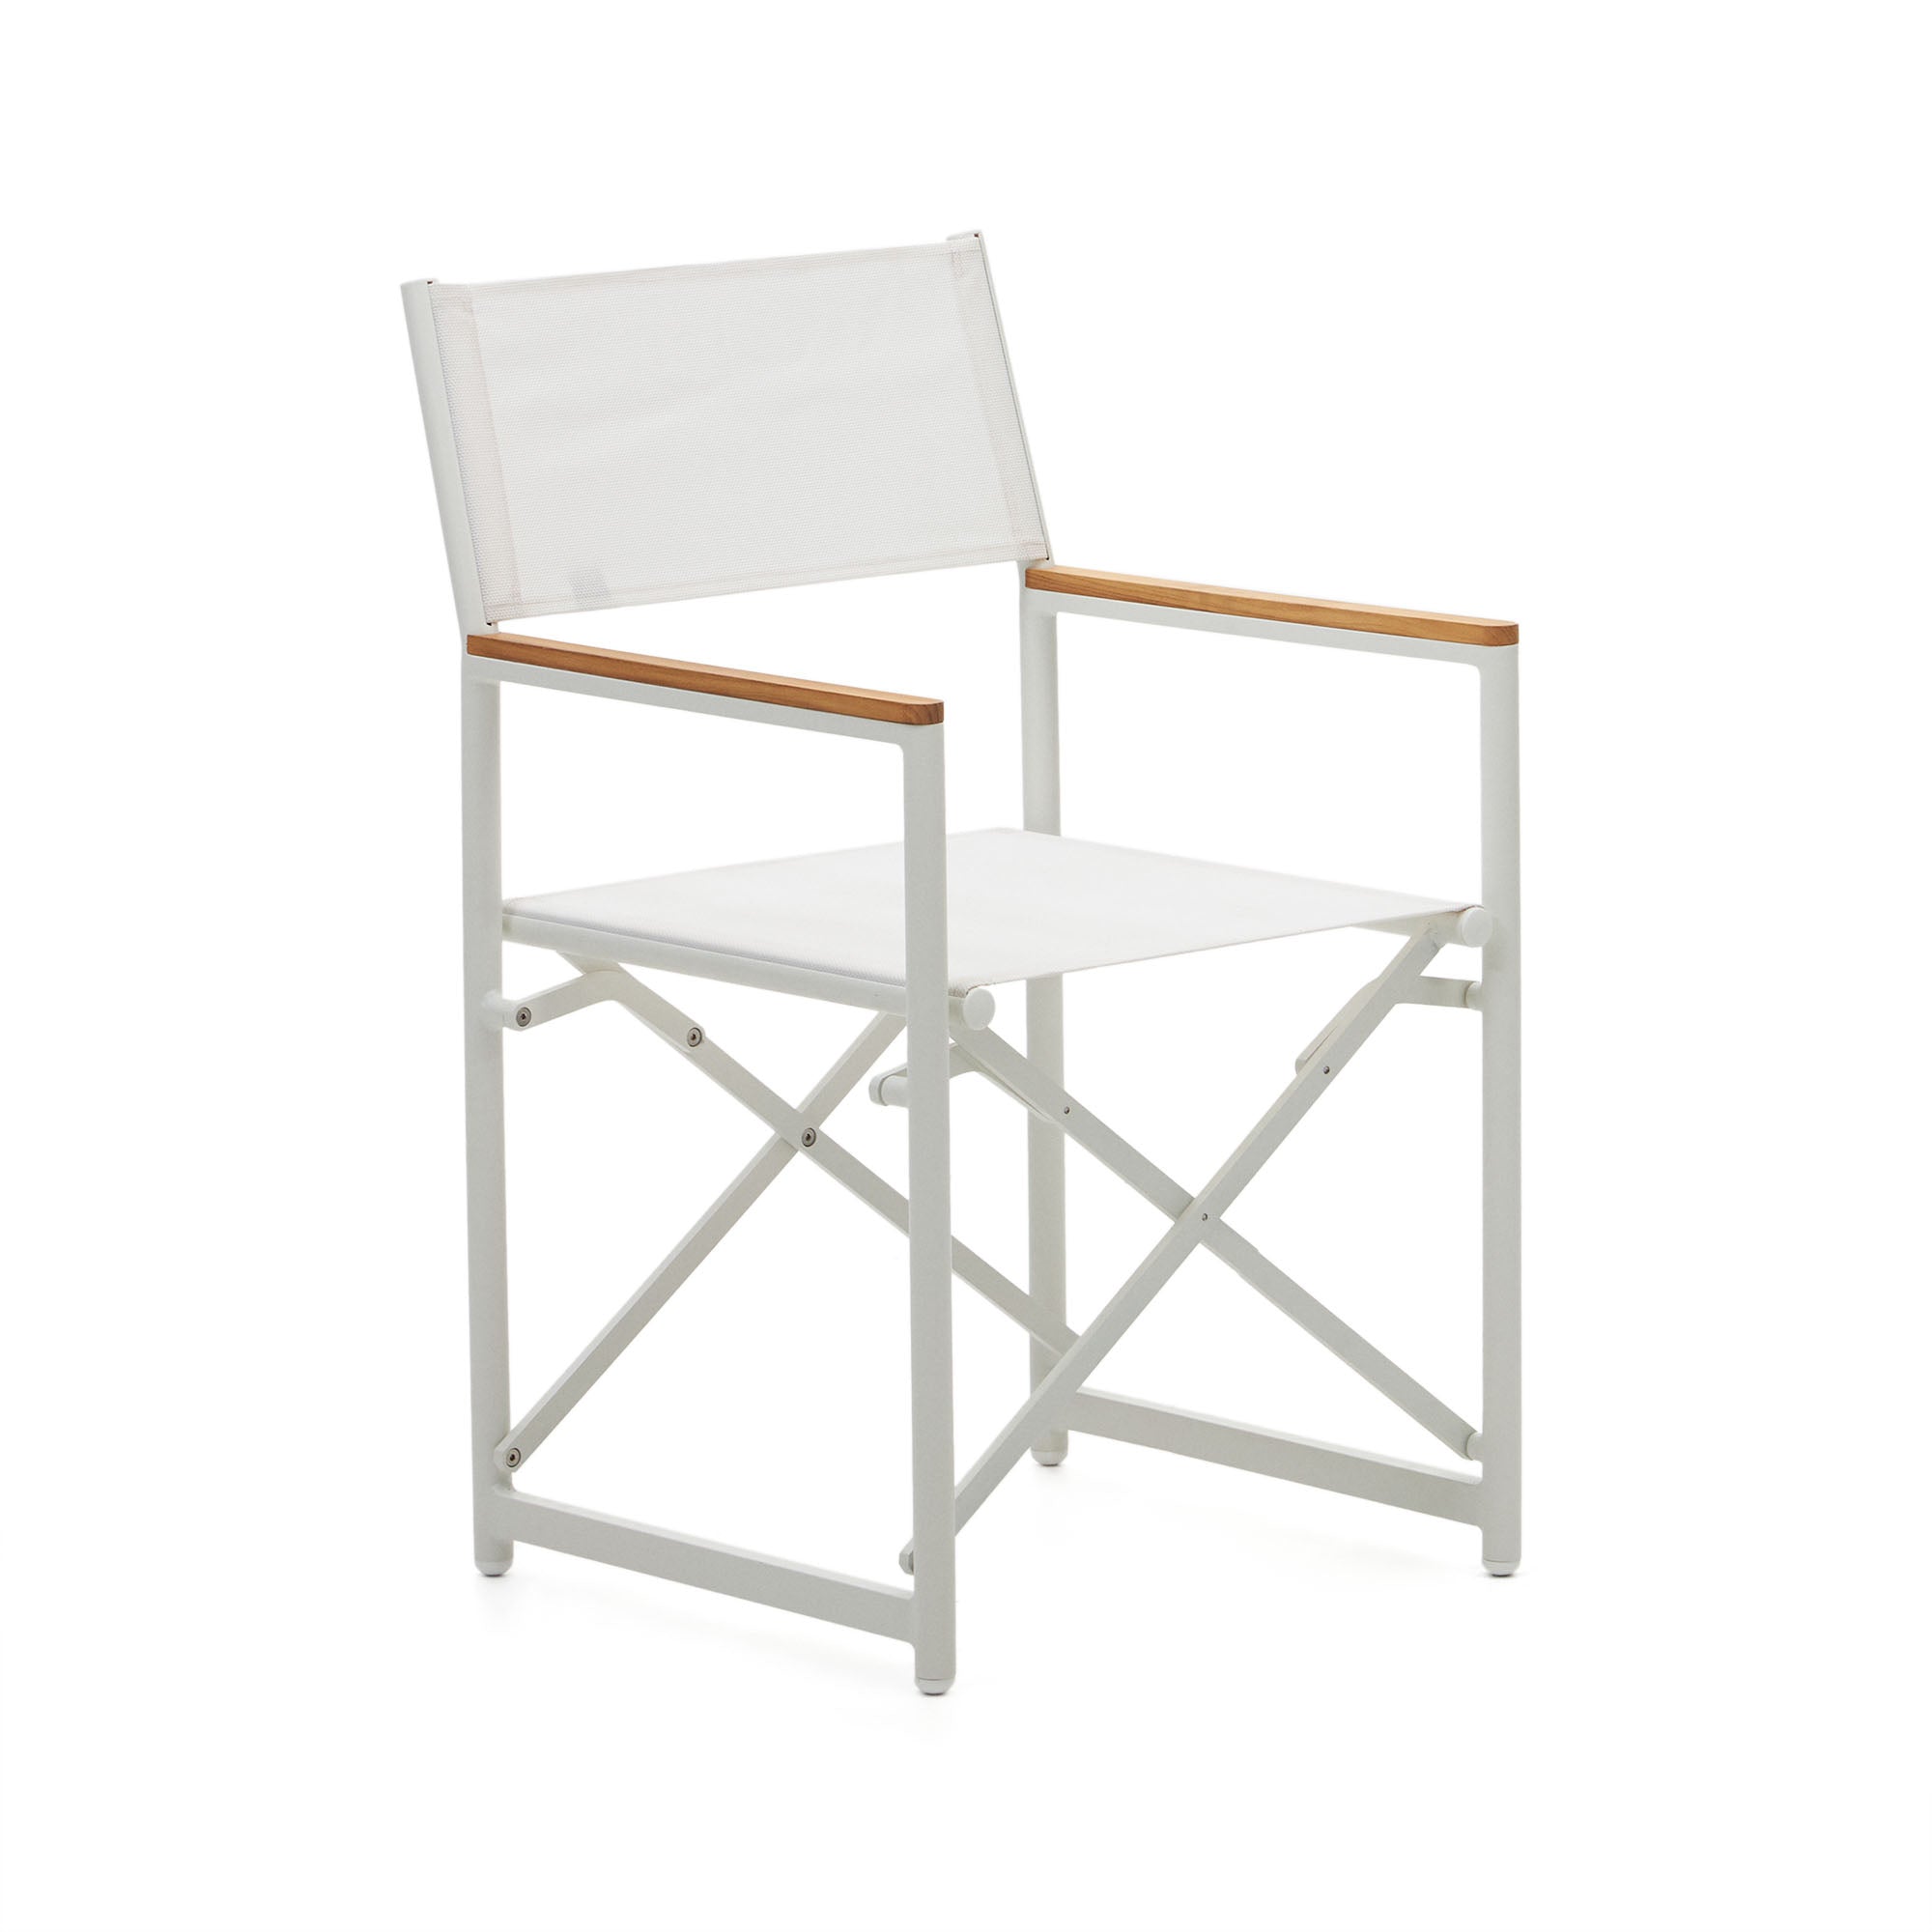 Llado white aluminium folding chair with solid teak armrests 100% outdoor suitable